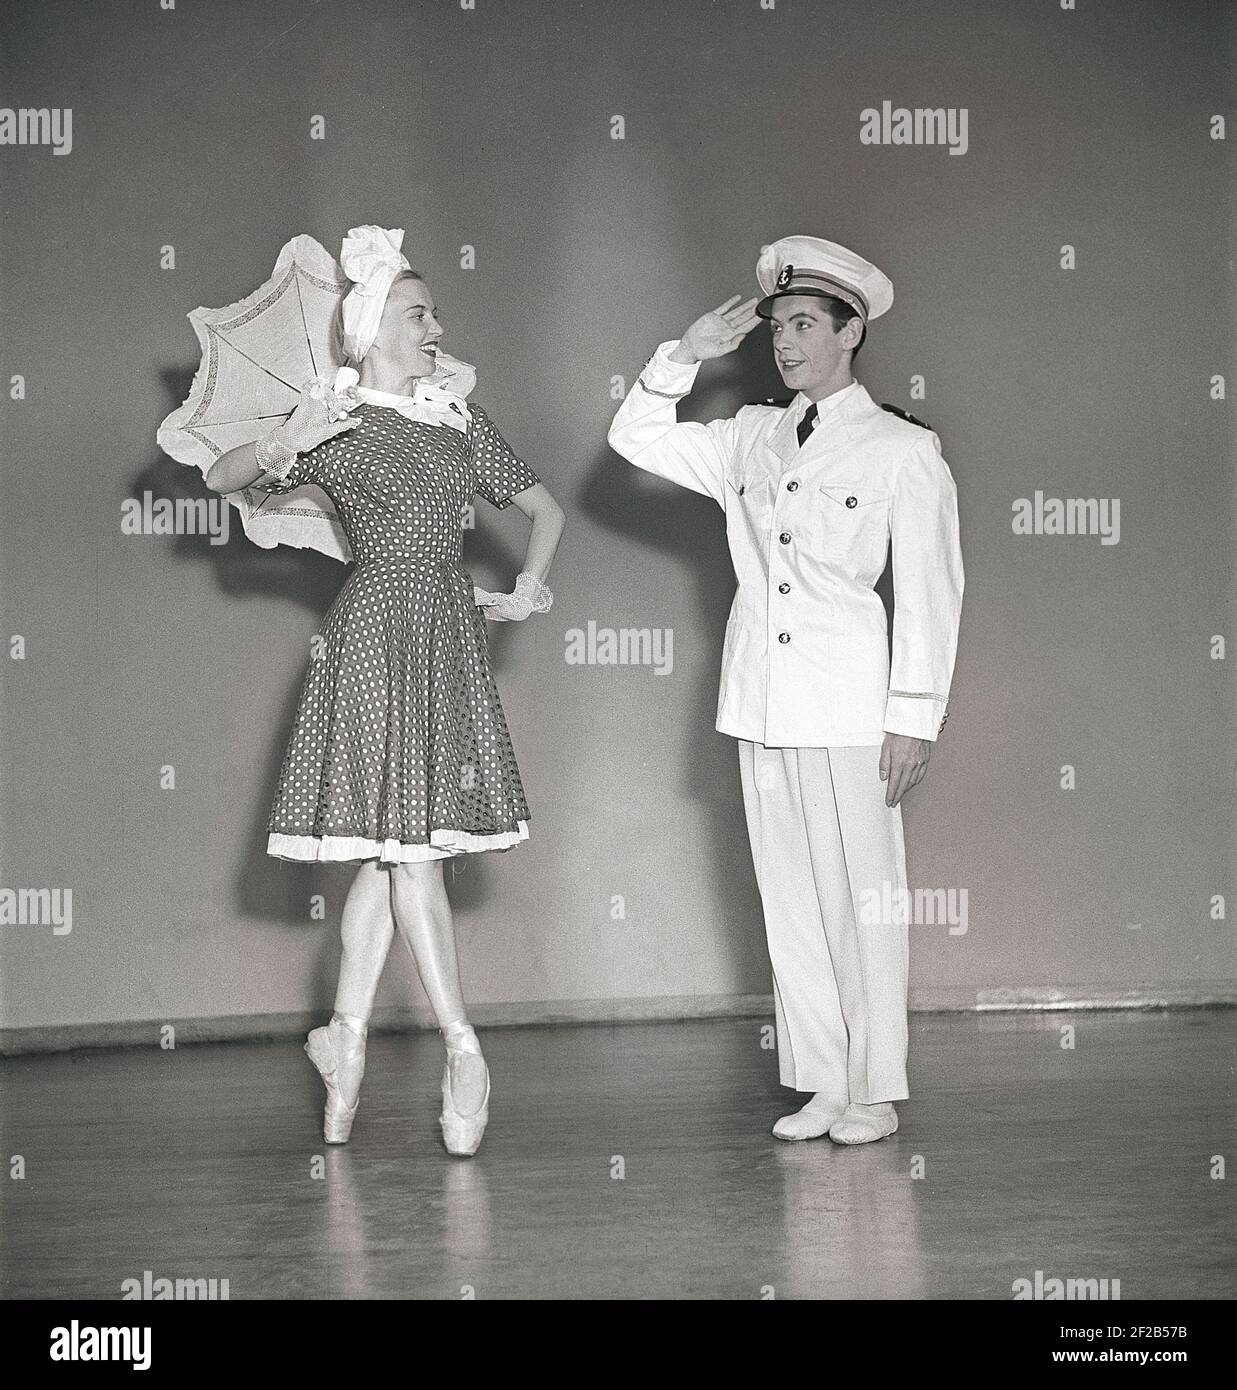 In the theatre in the 1940s. A ballet dancer on her toes in a dress and umbrella is greeted by a girl dressed in a white navy uniform who salutes her. Two members of a theatre ensemble. Sweden 1947. ref AC58-4 Stock Photo